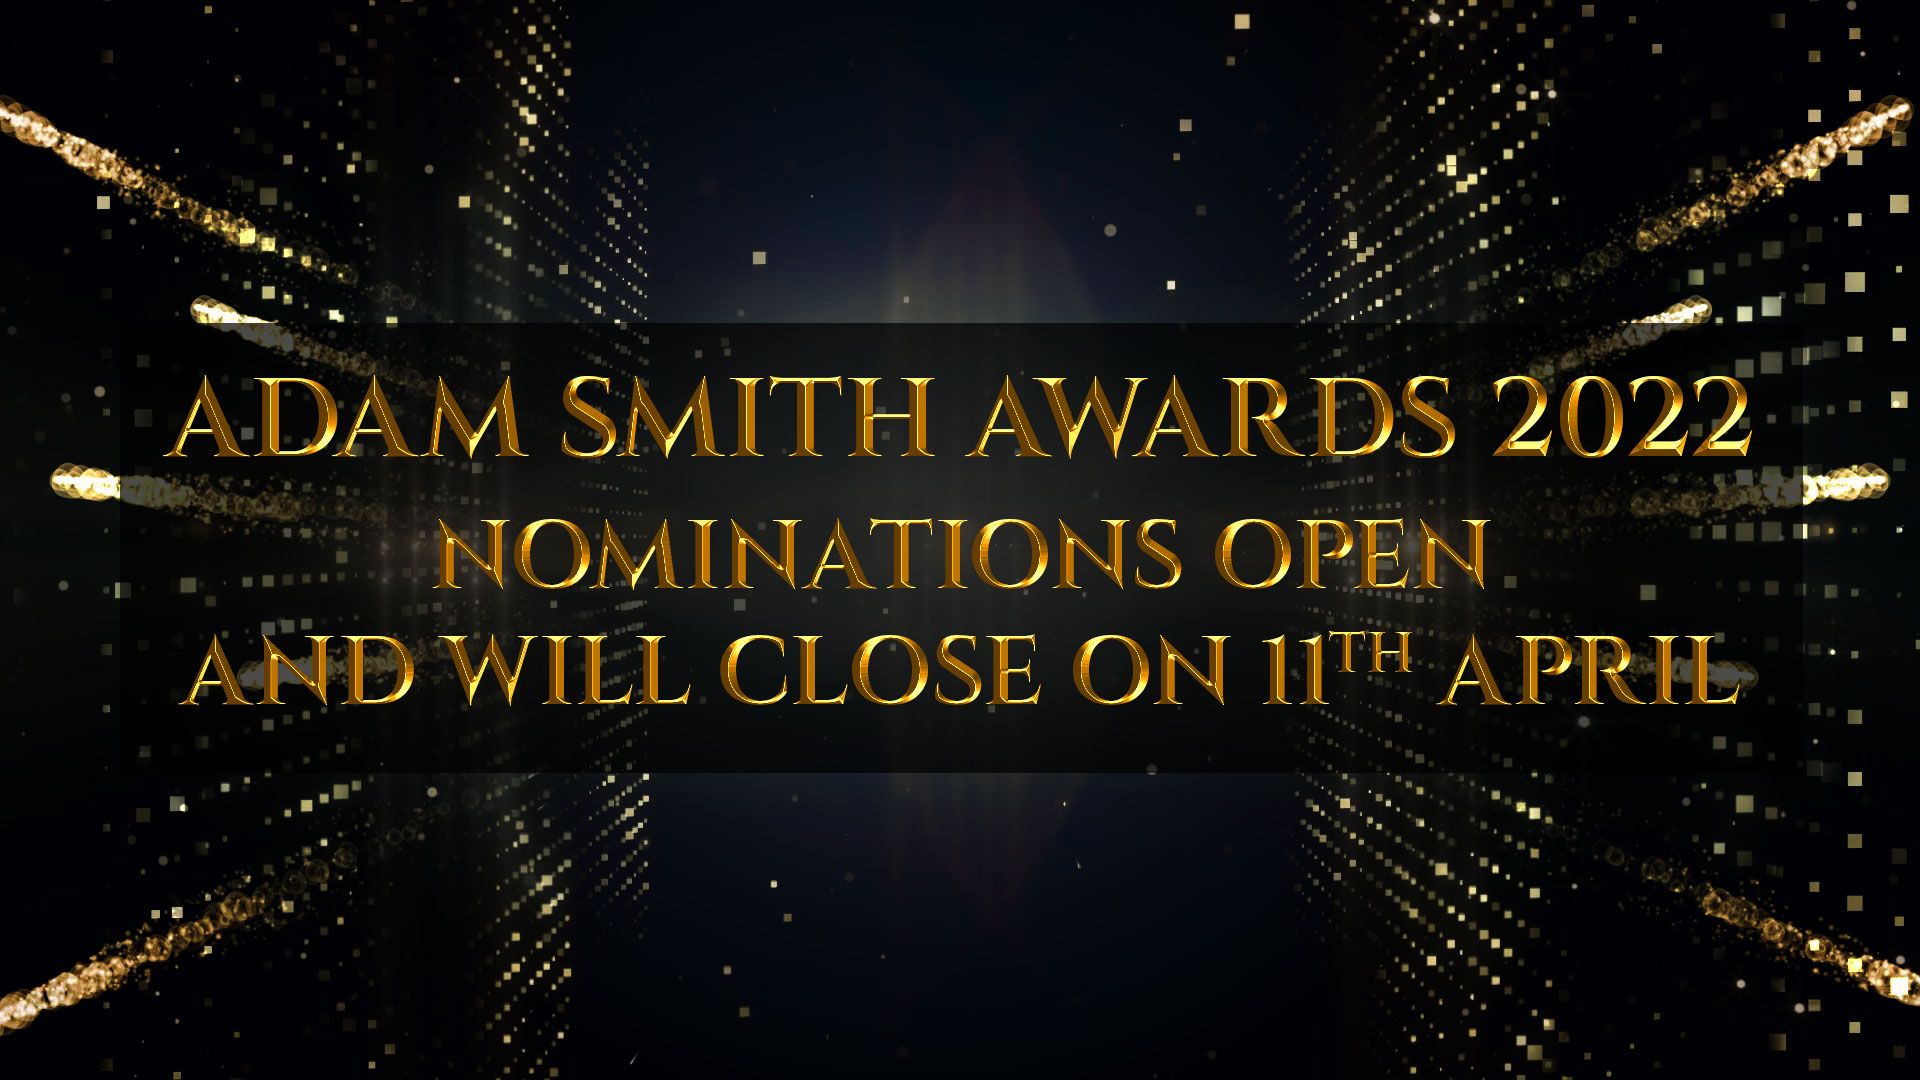 Adam Smith Awards 2022 nominations open and will close on the 11th April